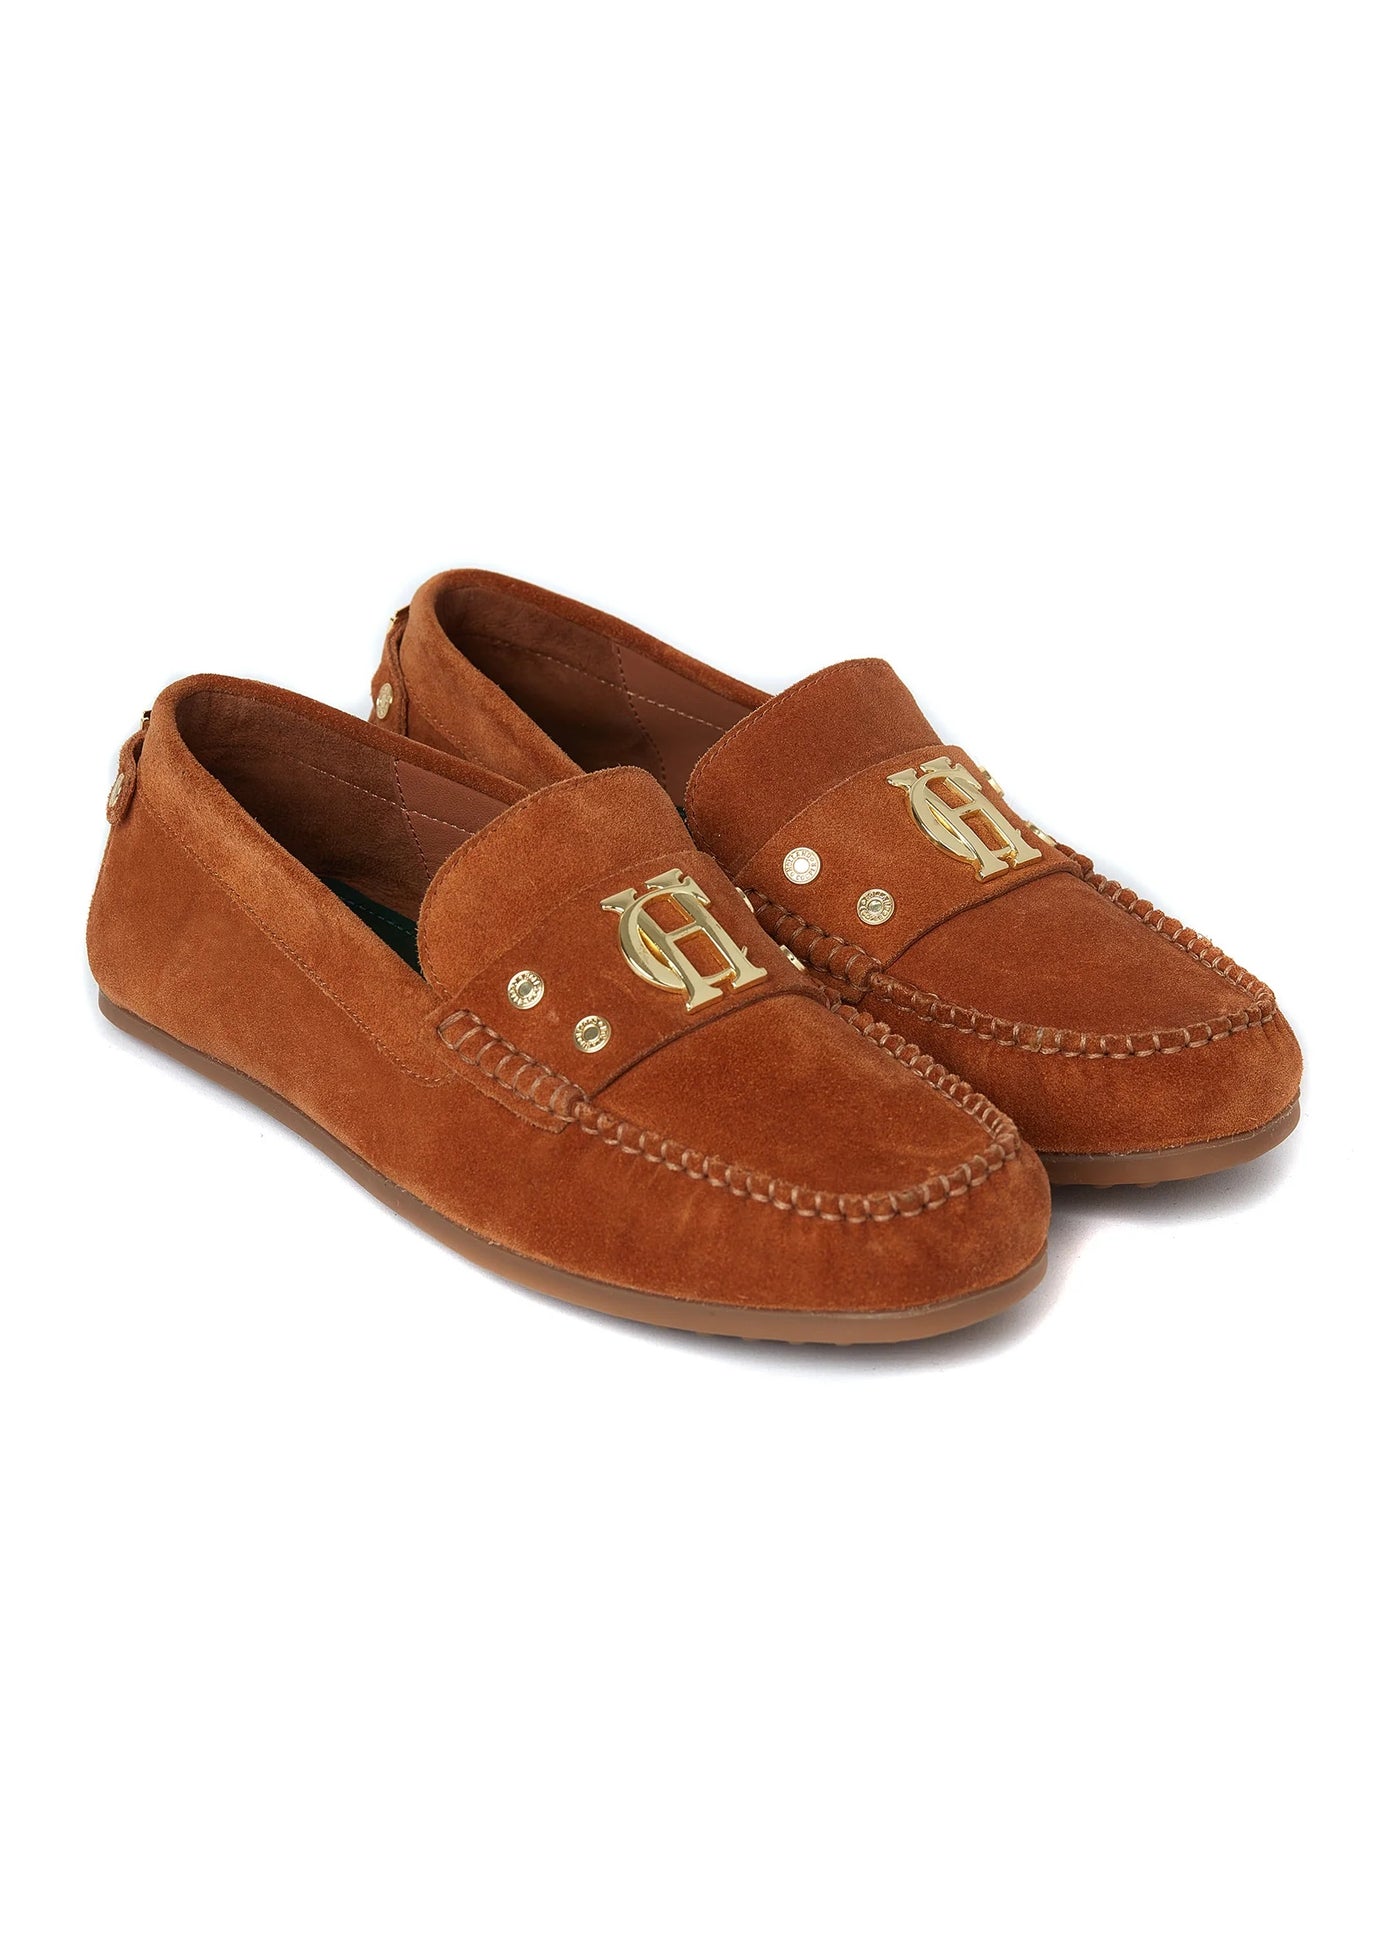 Holland Cooper The Driving Loafer Shoe in Tan Pair